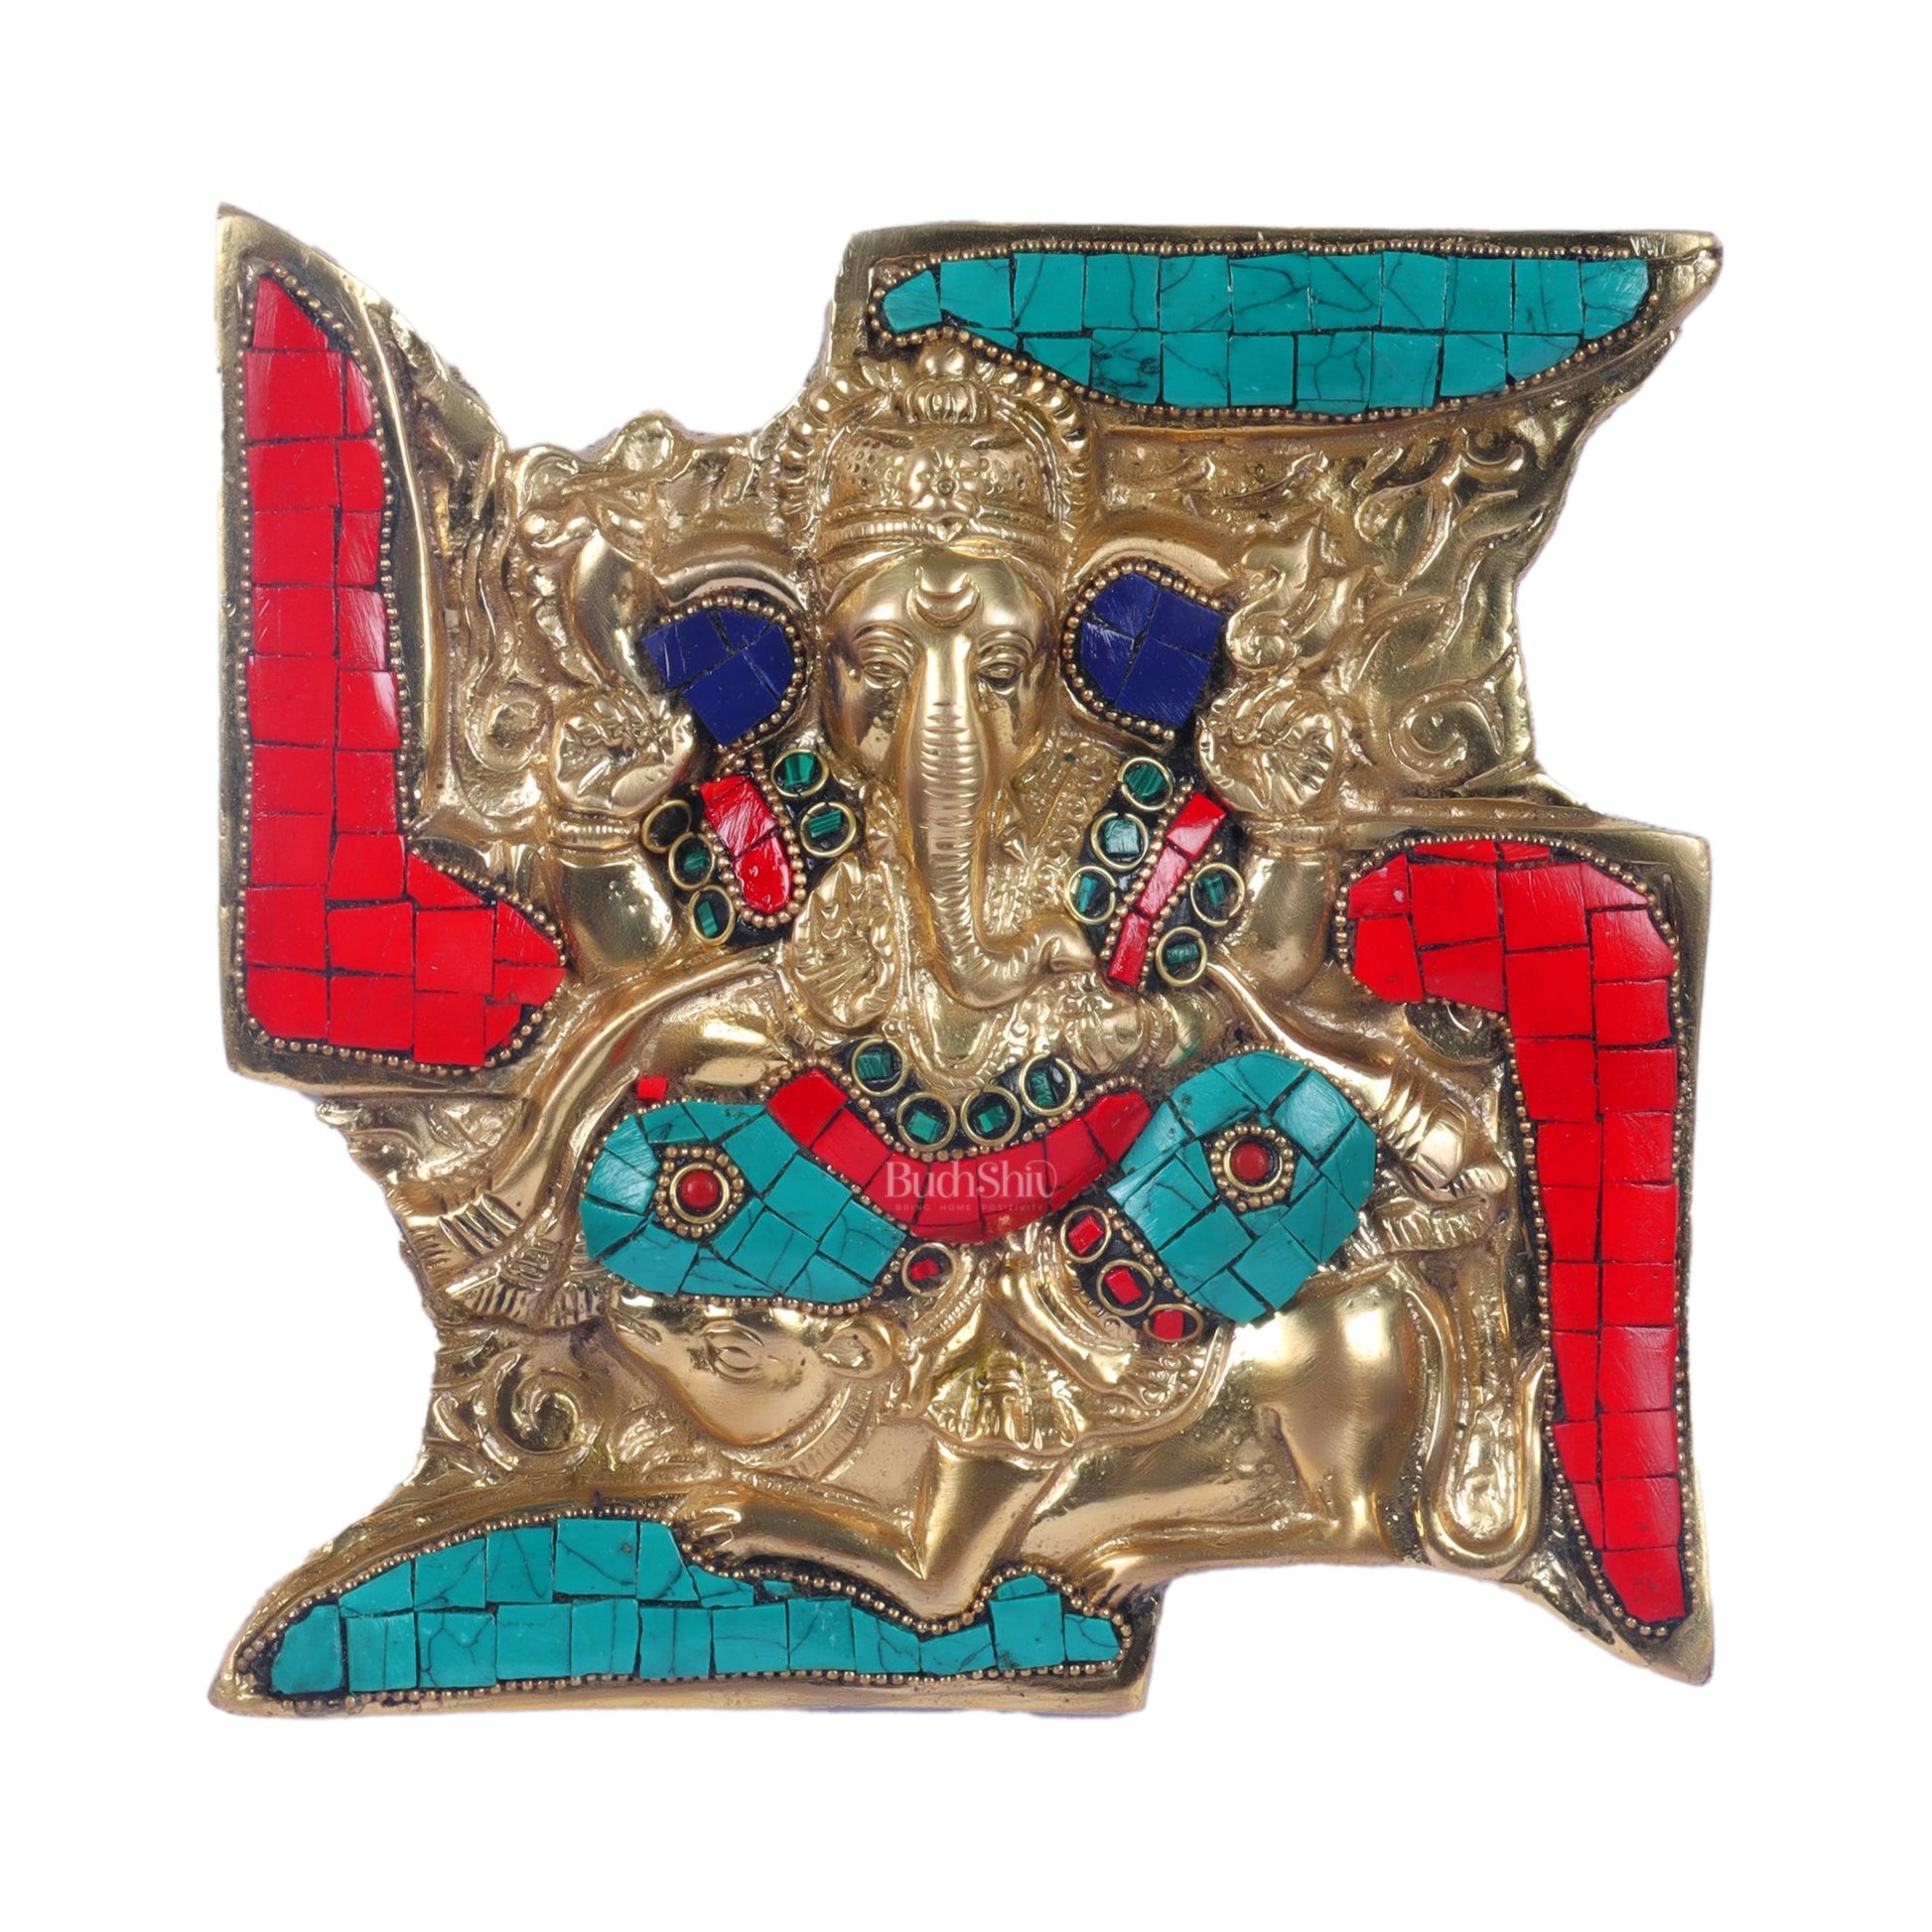 Handcrafted Brass Ganapathi Wall Hanging with Natural Stone Dressing - 9" Height - Budhshiv.com